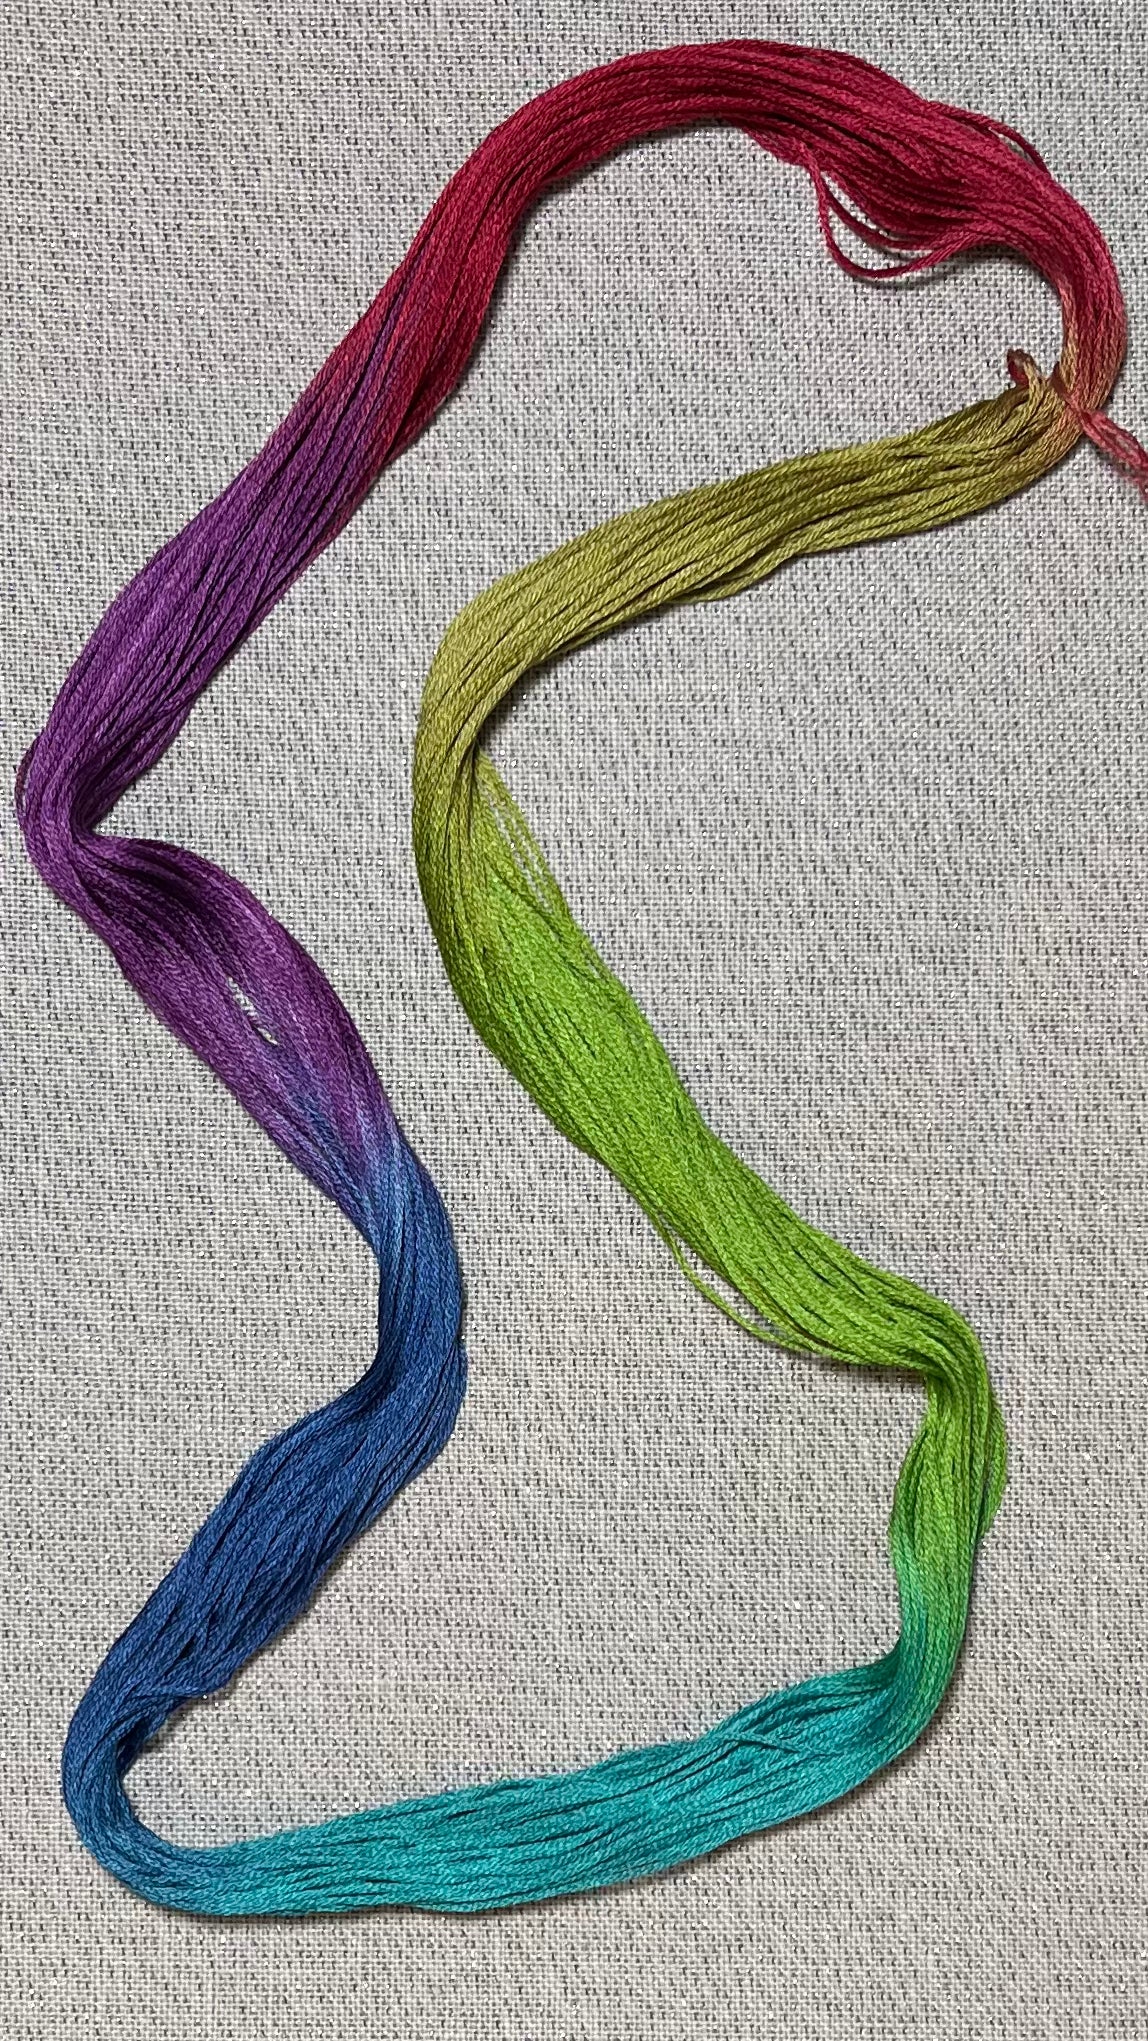 Cotton hand dyed floss - Bejewel